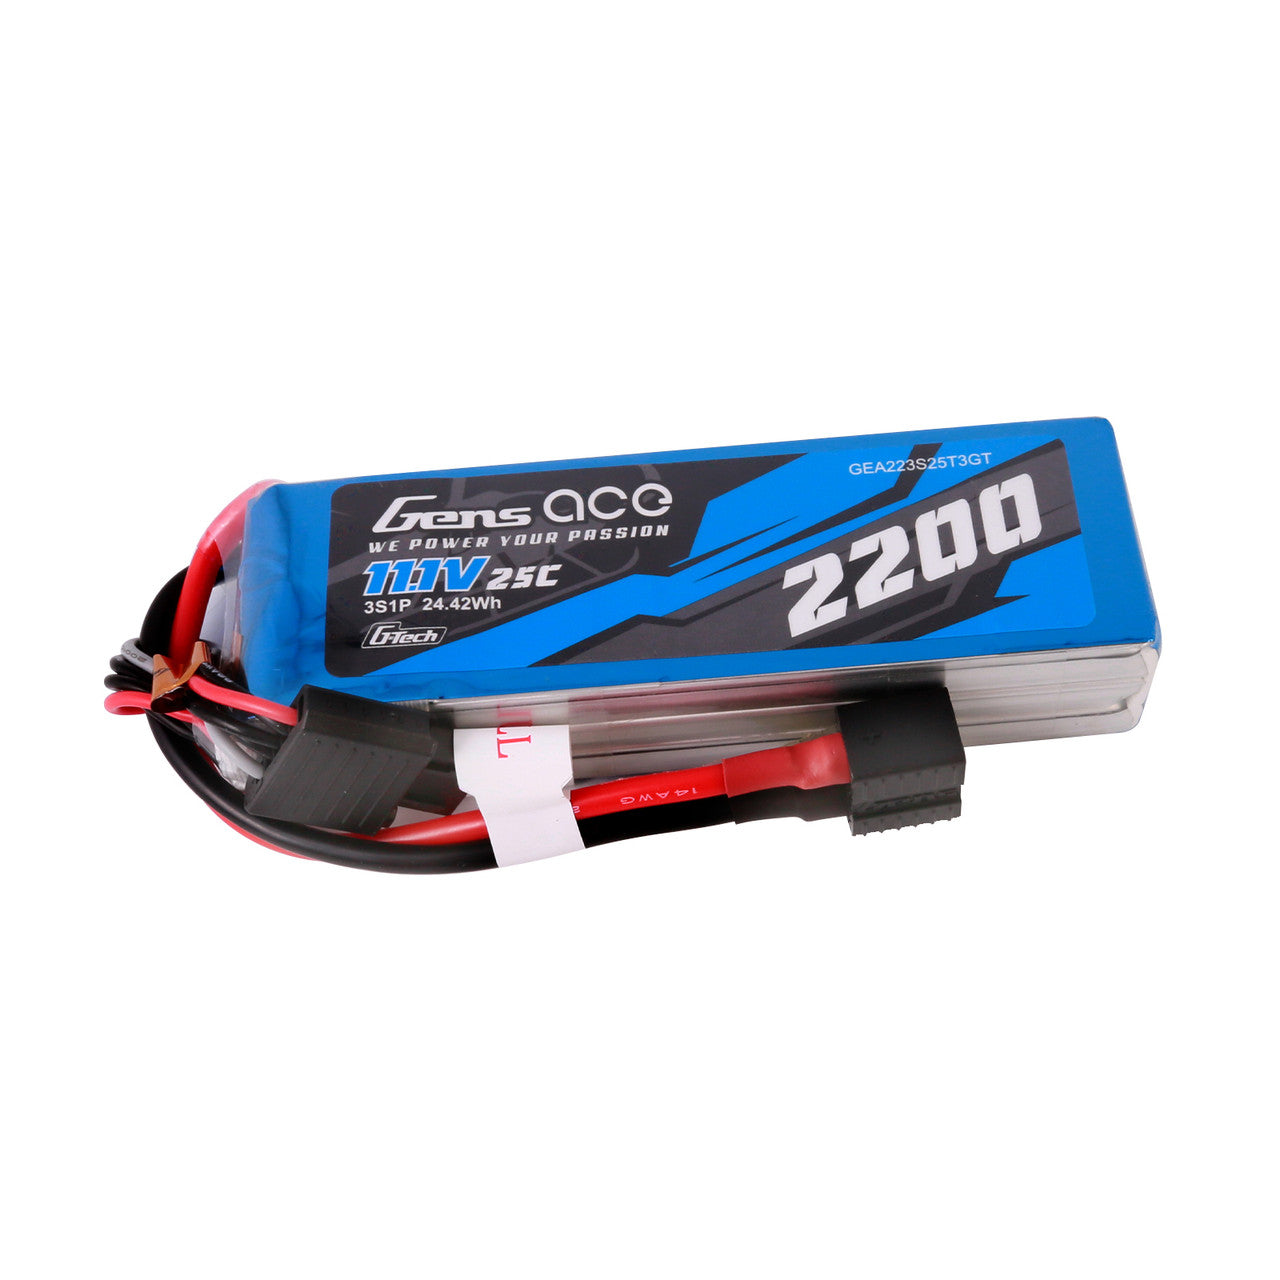 Gens Ace G-Tech 2200mAh 11.1V 3S1P 25C Lipo Battery Pack With EC3, Deans And XT60 Adapter